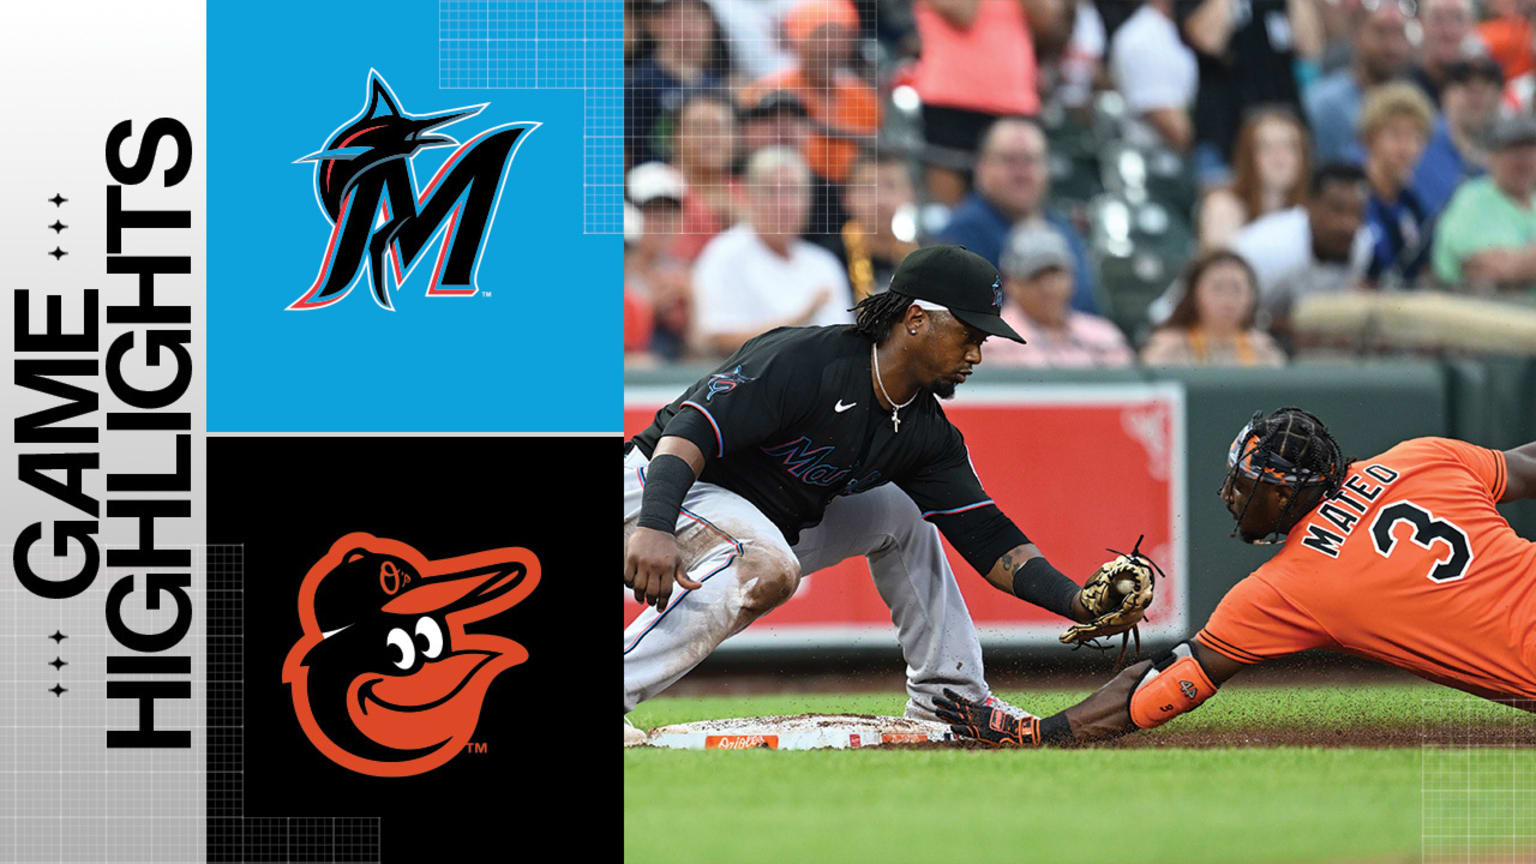 Marlins vs. Orioles Probable Starting Pitching - July 15